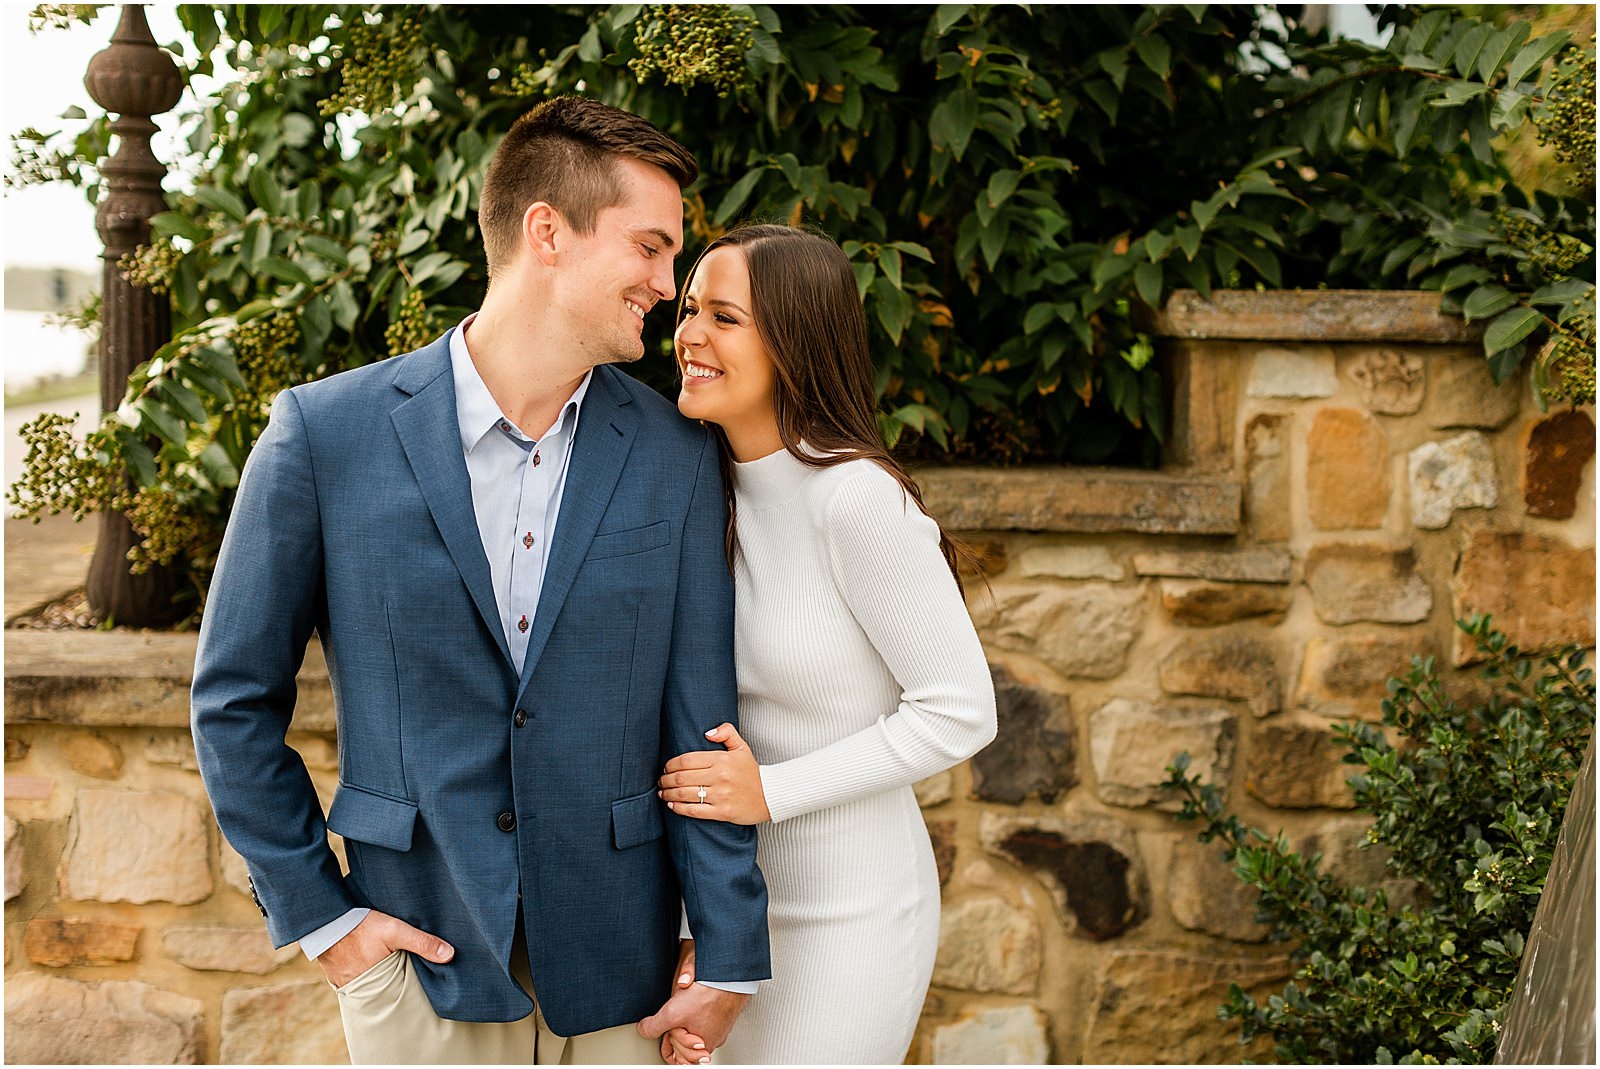 Emma and Jace's Downtown Newburgh Engagement Session | Bret and Brandie Photography | Evansville Indiana Wedding Photographers_0015.jpg